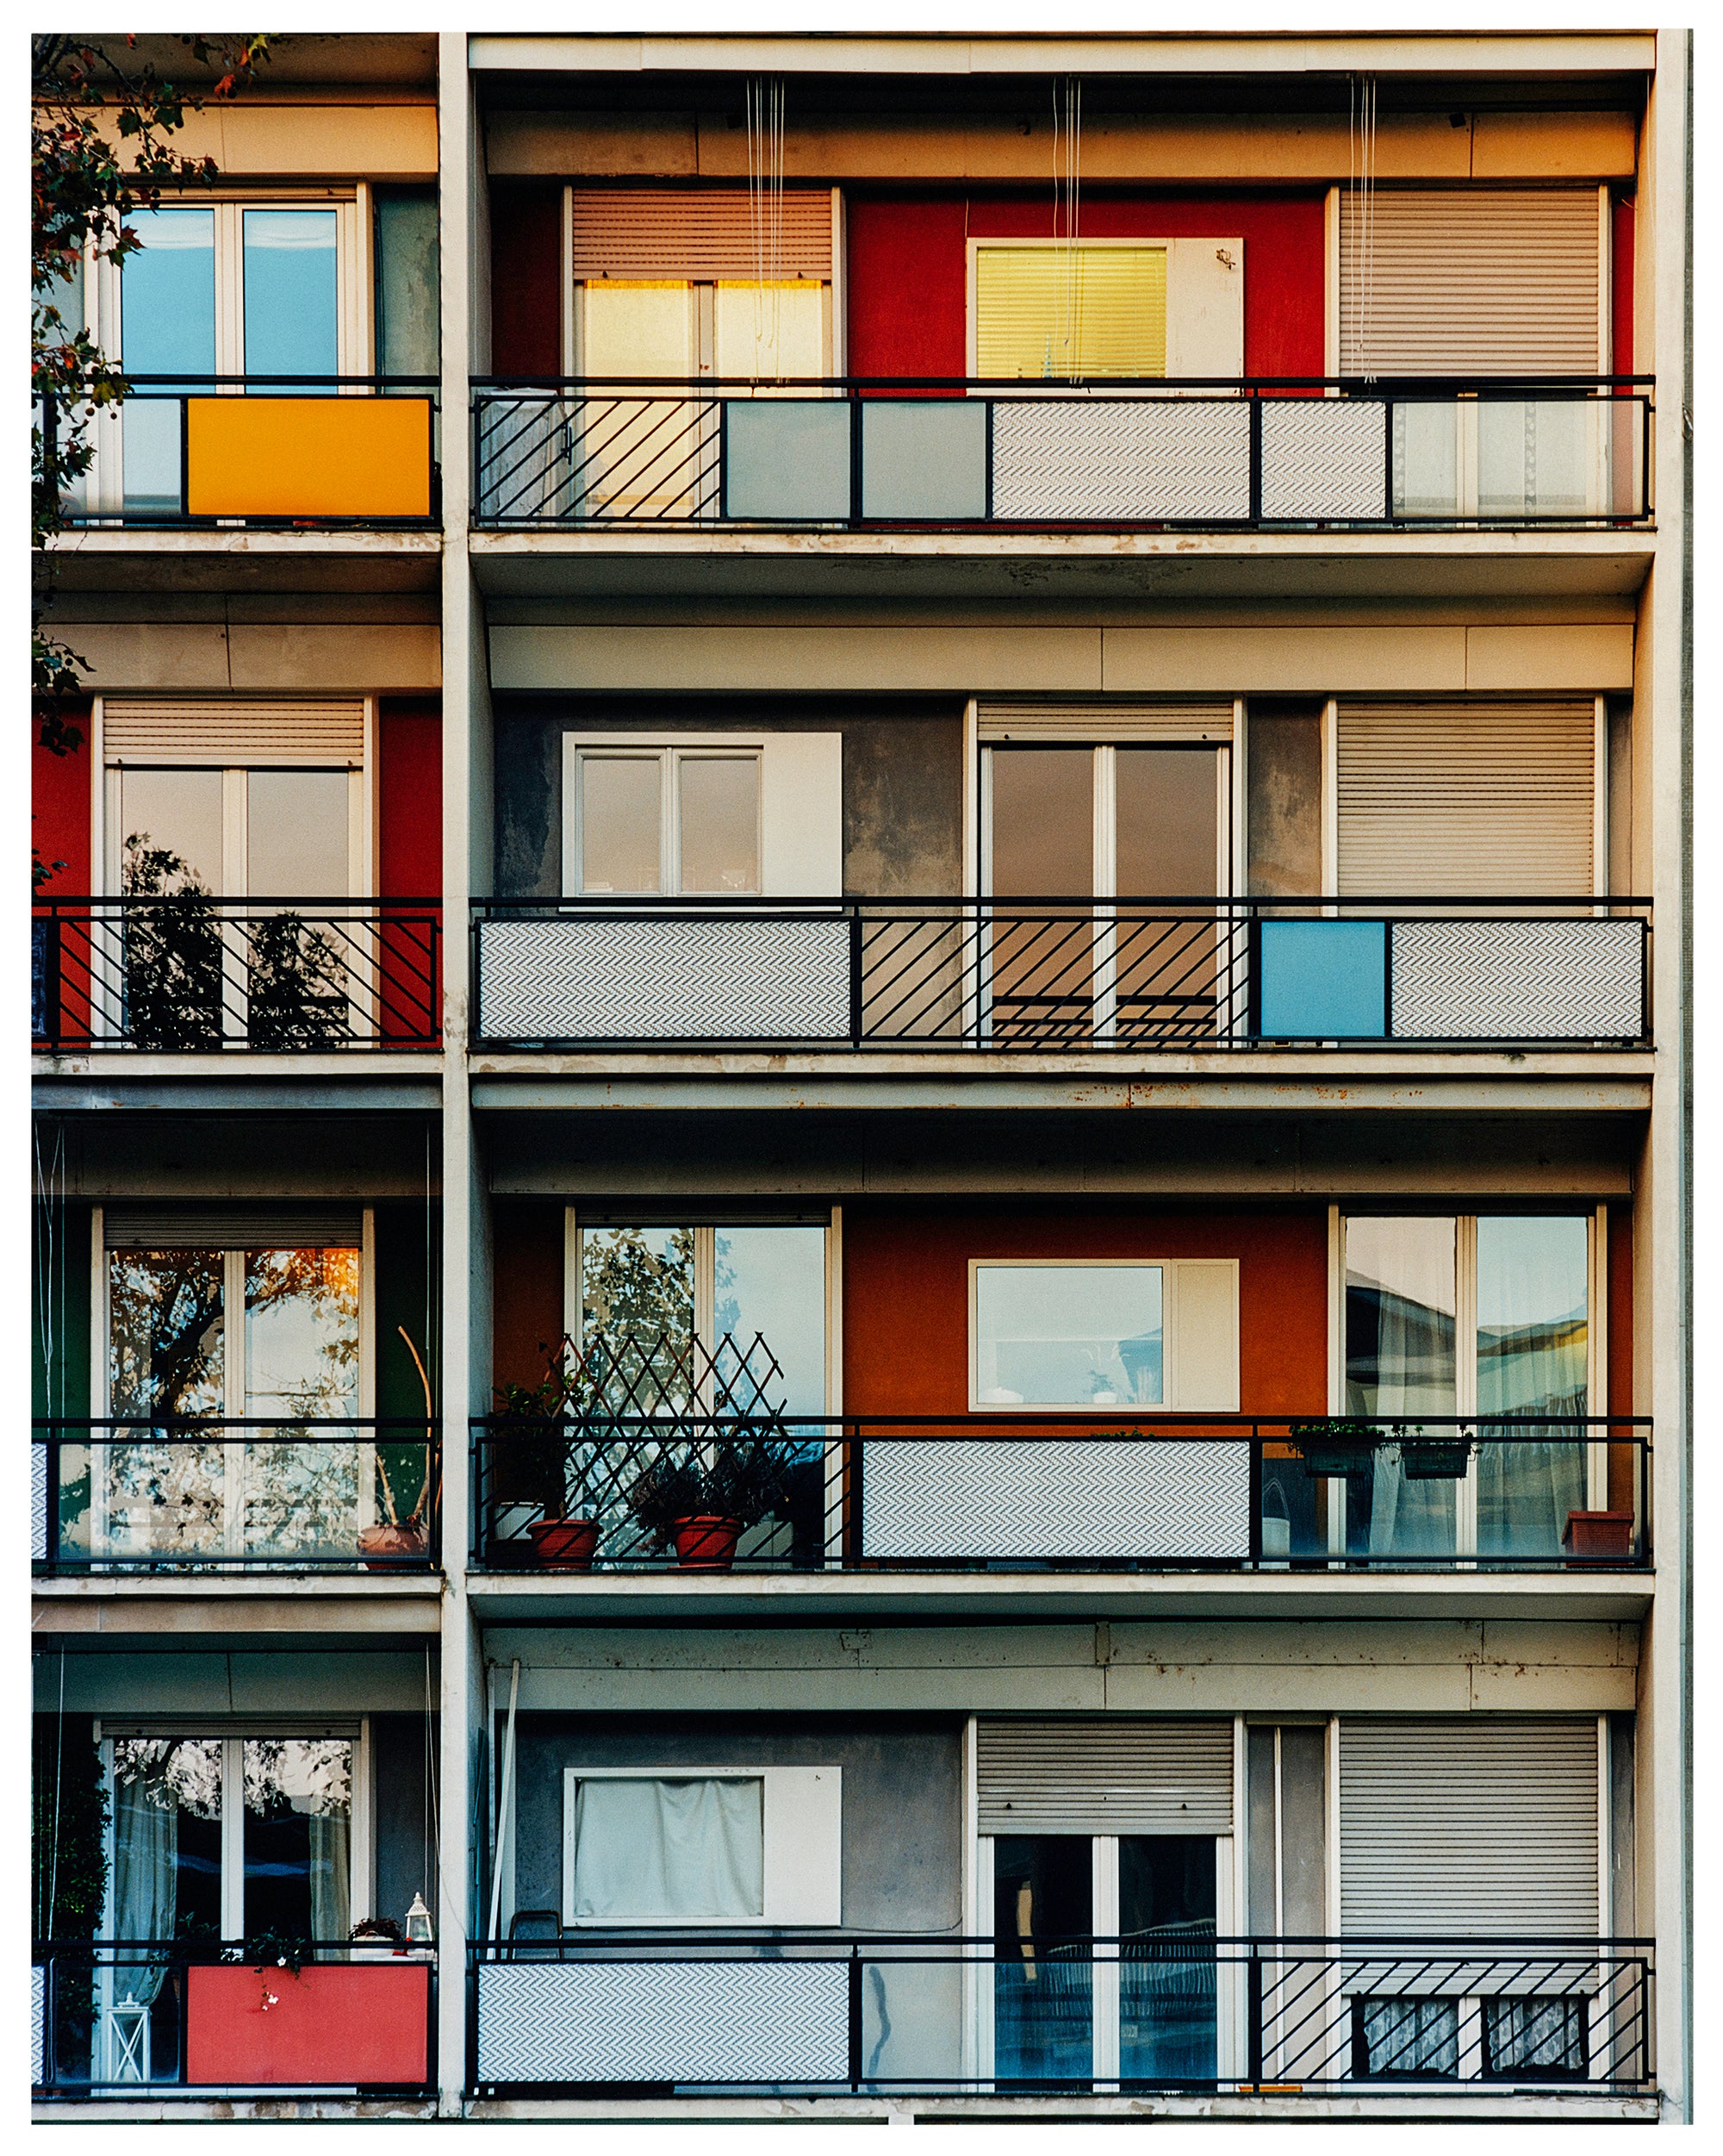 Photograph by Richard Heeps. This is the balconies and balcony doors of 4 floors of flats located on the Rue Dezza. The colours of the walls alternate between red and grey but look different as the light catches them.